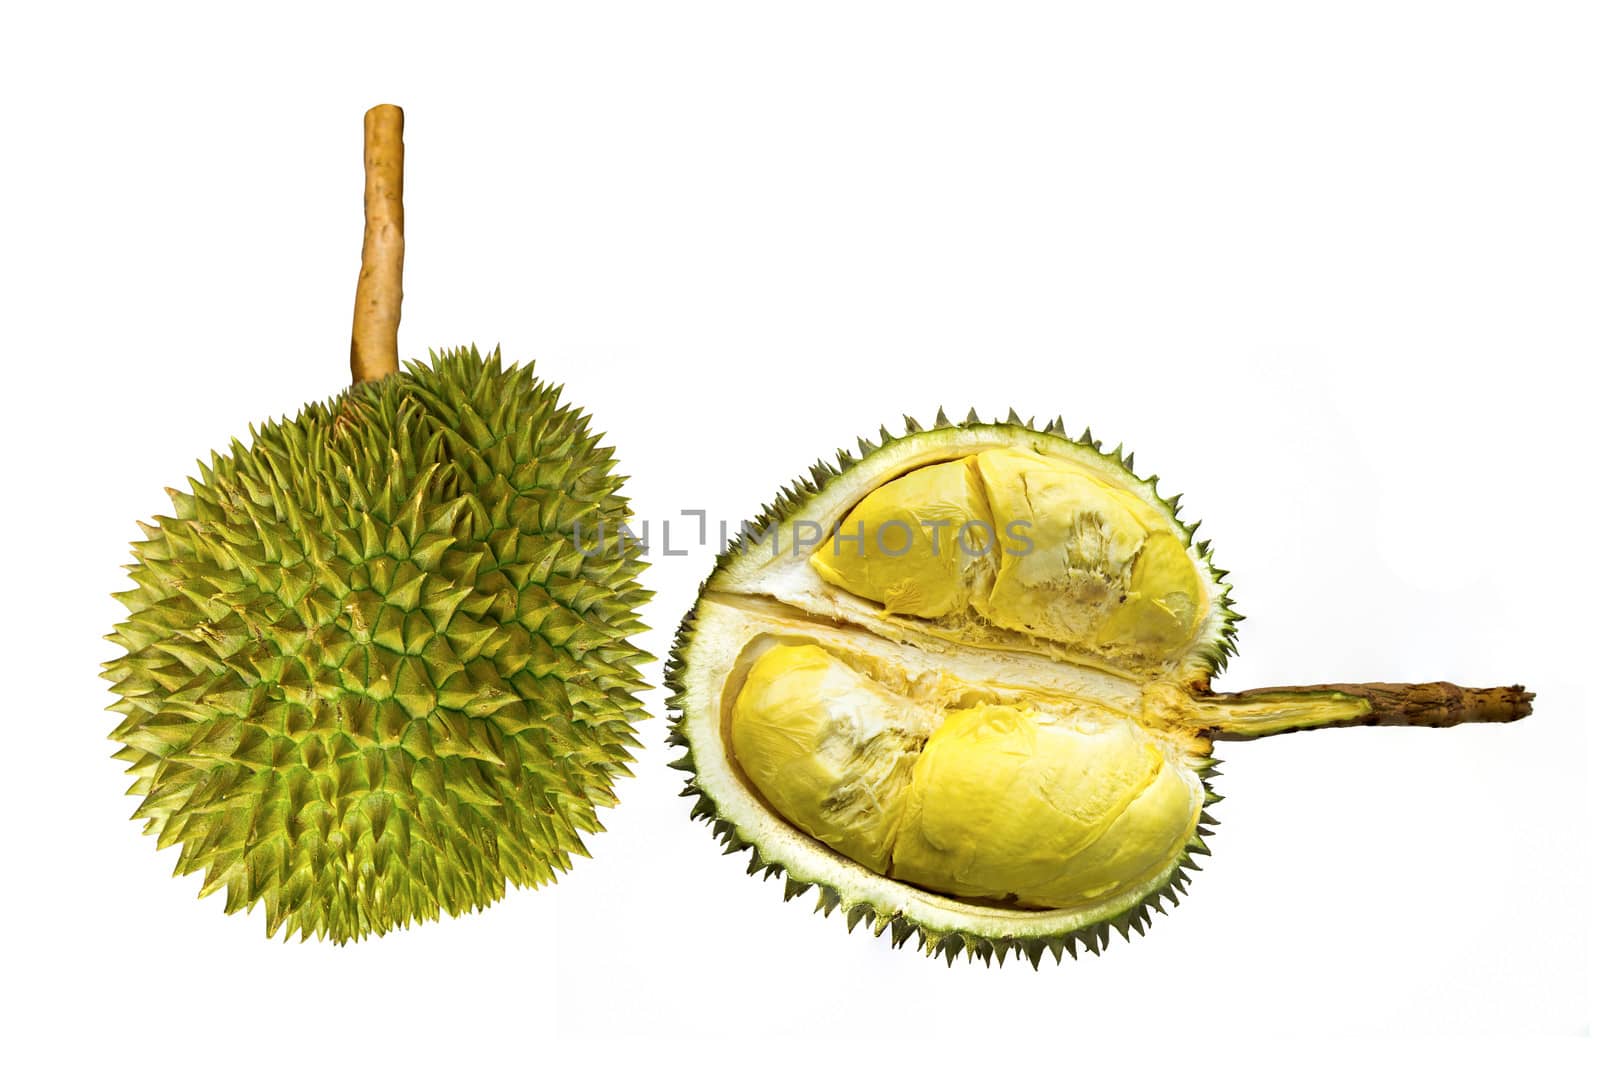 long stem, king of durian sweet and delicious